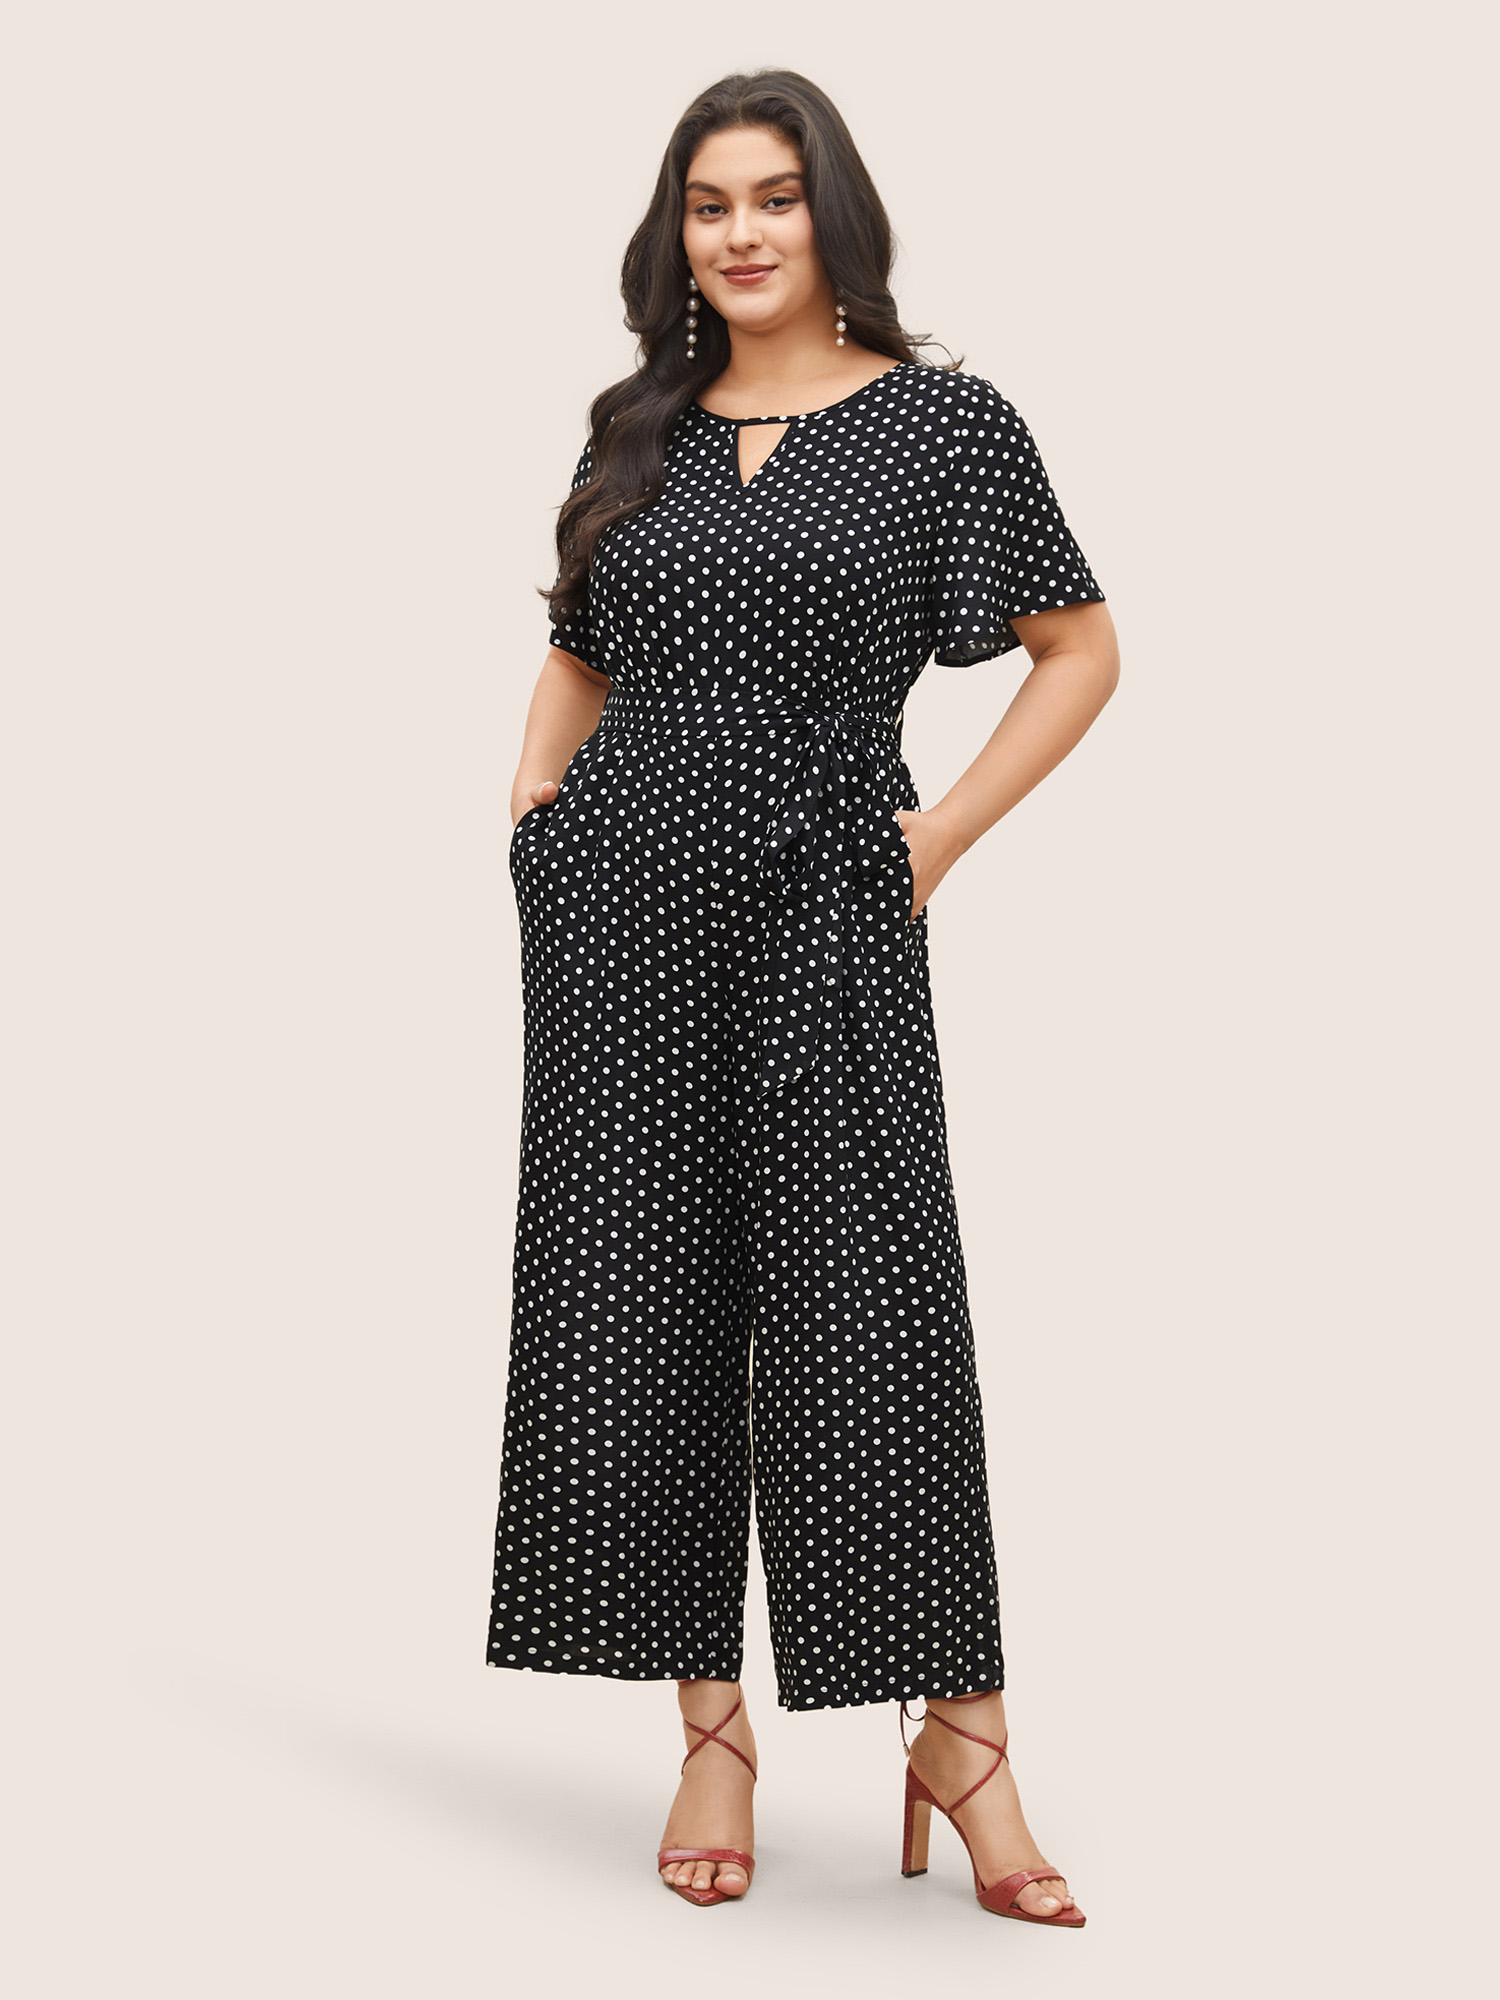 

Plus Size Black Polka Dot Cut Out Zipper Belted Jumpsuit Women Elegant Short sleeve Notched collar Everyday Loose Jumpsuits BloomChic